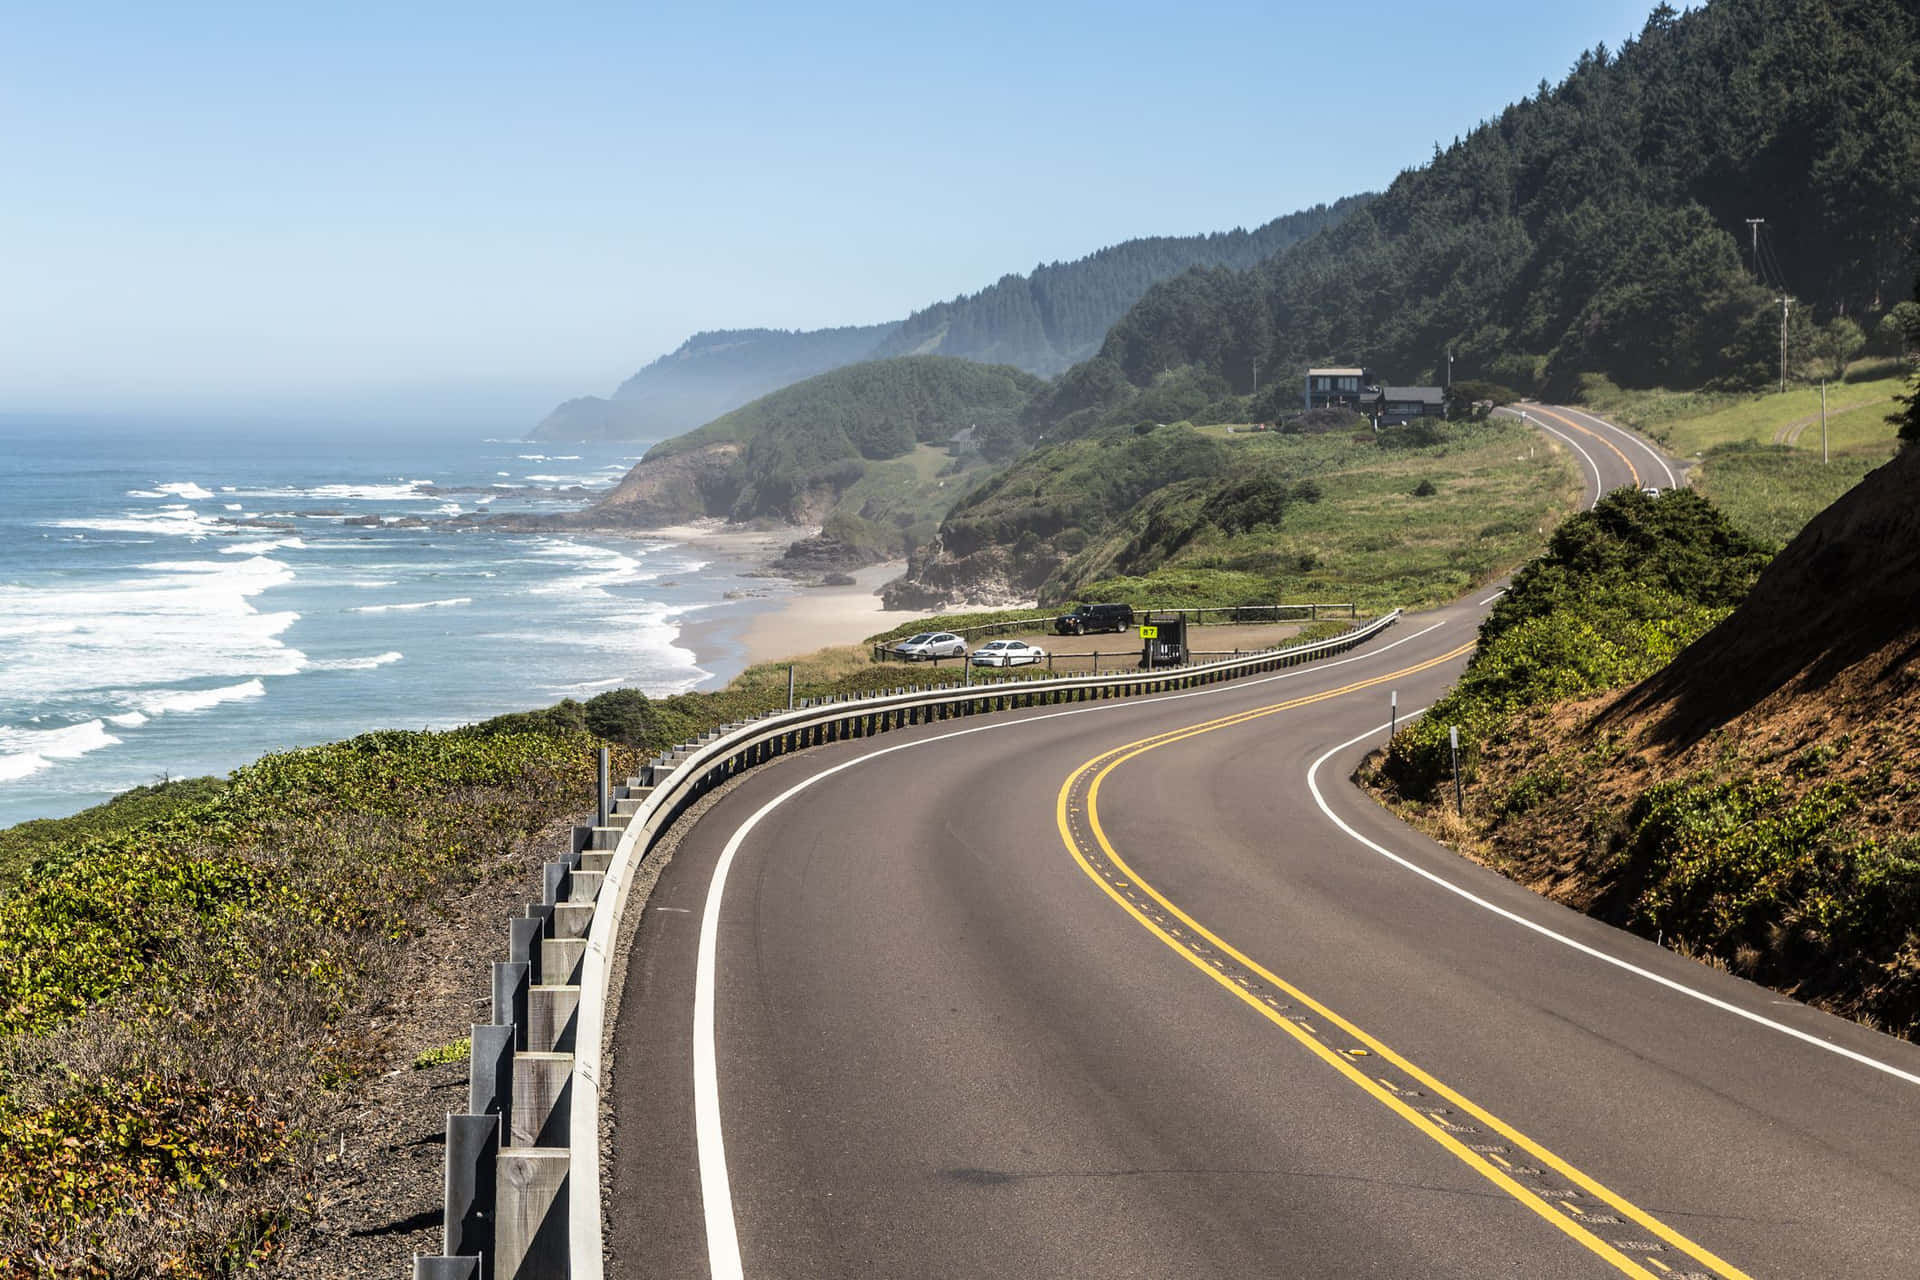 A Road Leading To The Ocean With A View Of The Ocean